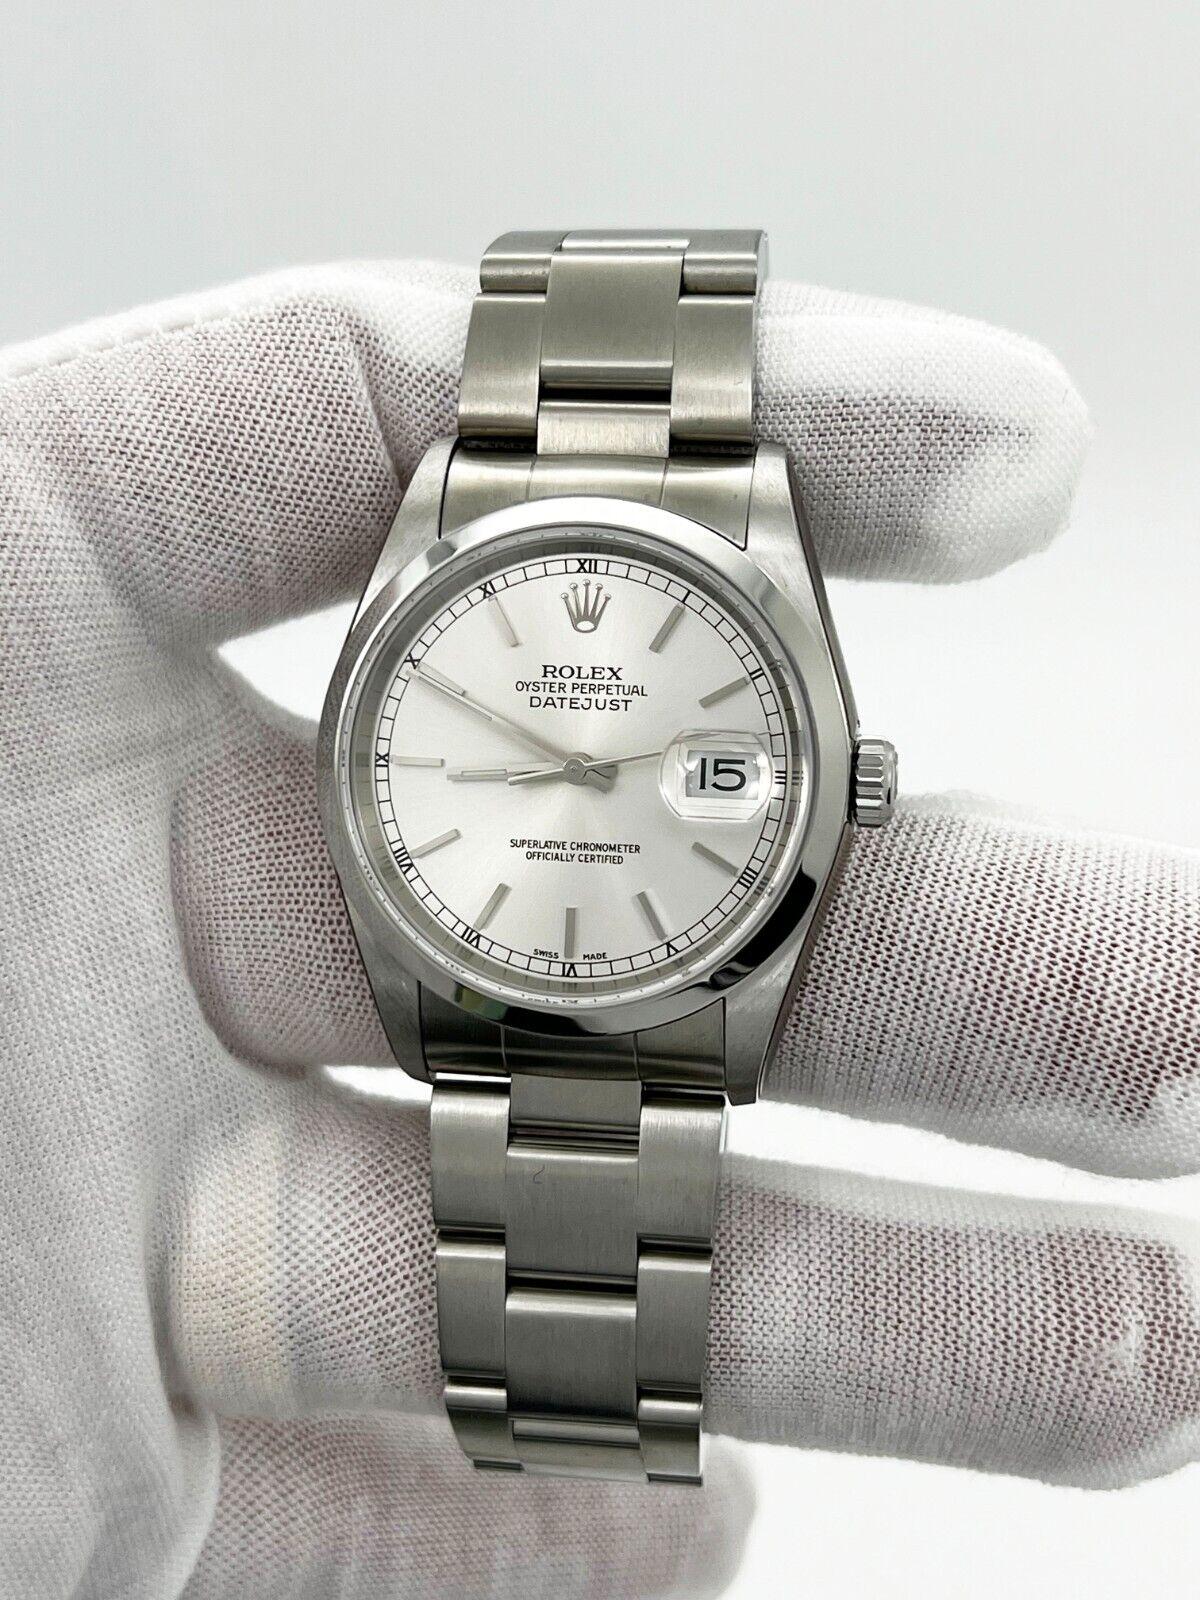 Rolex Datejust 16200 Silver Dial Stainless Steel Box Paper 2005 For Sale 1